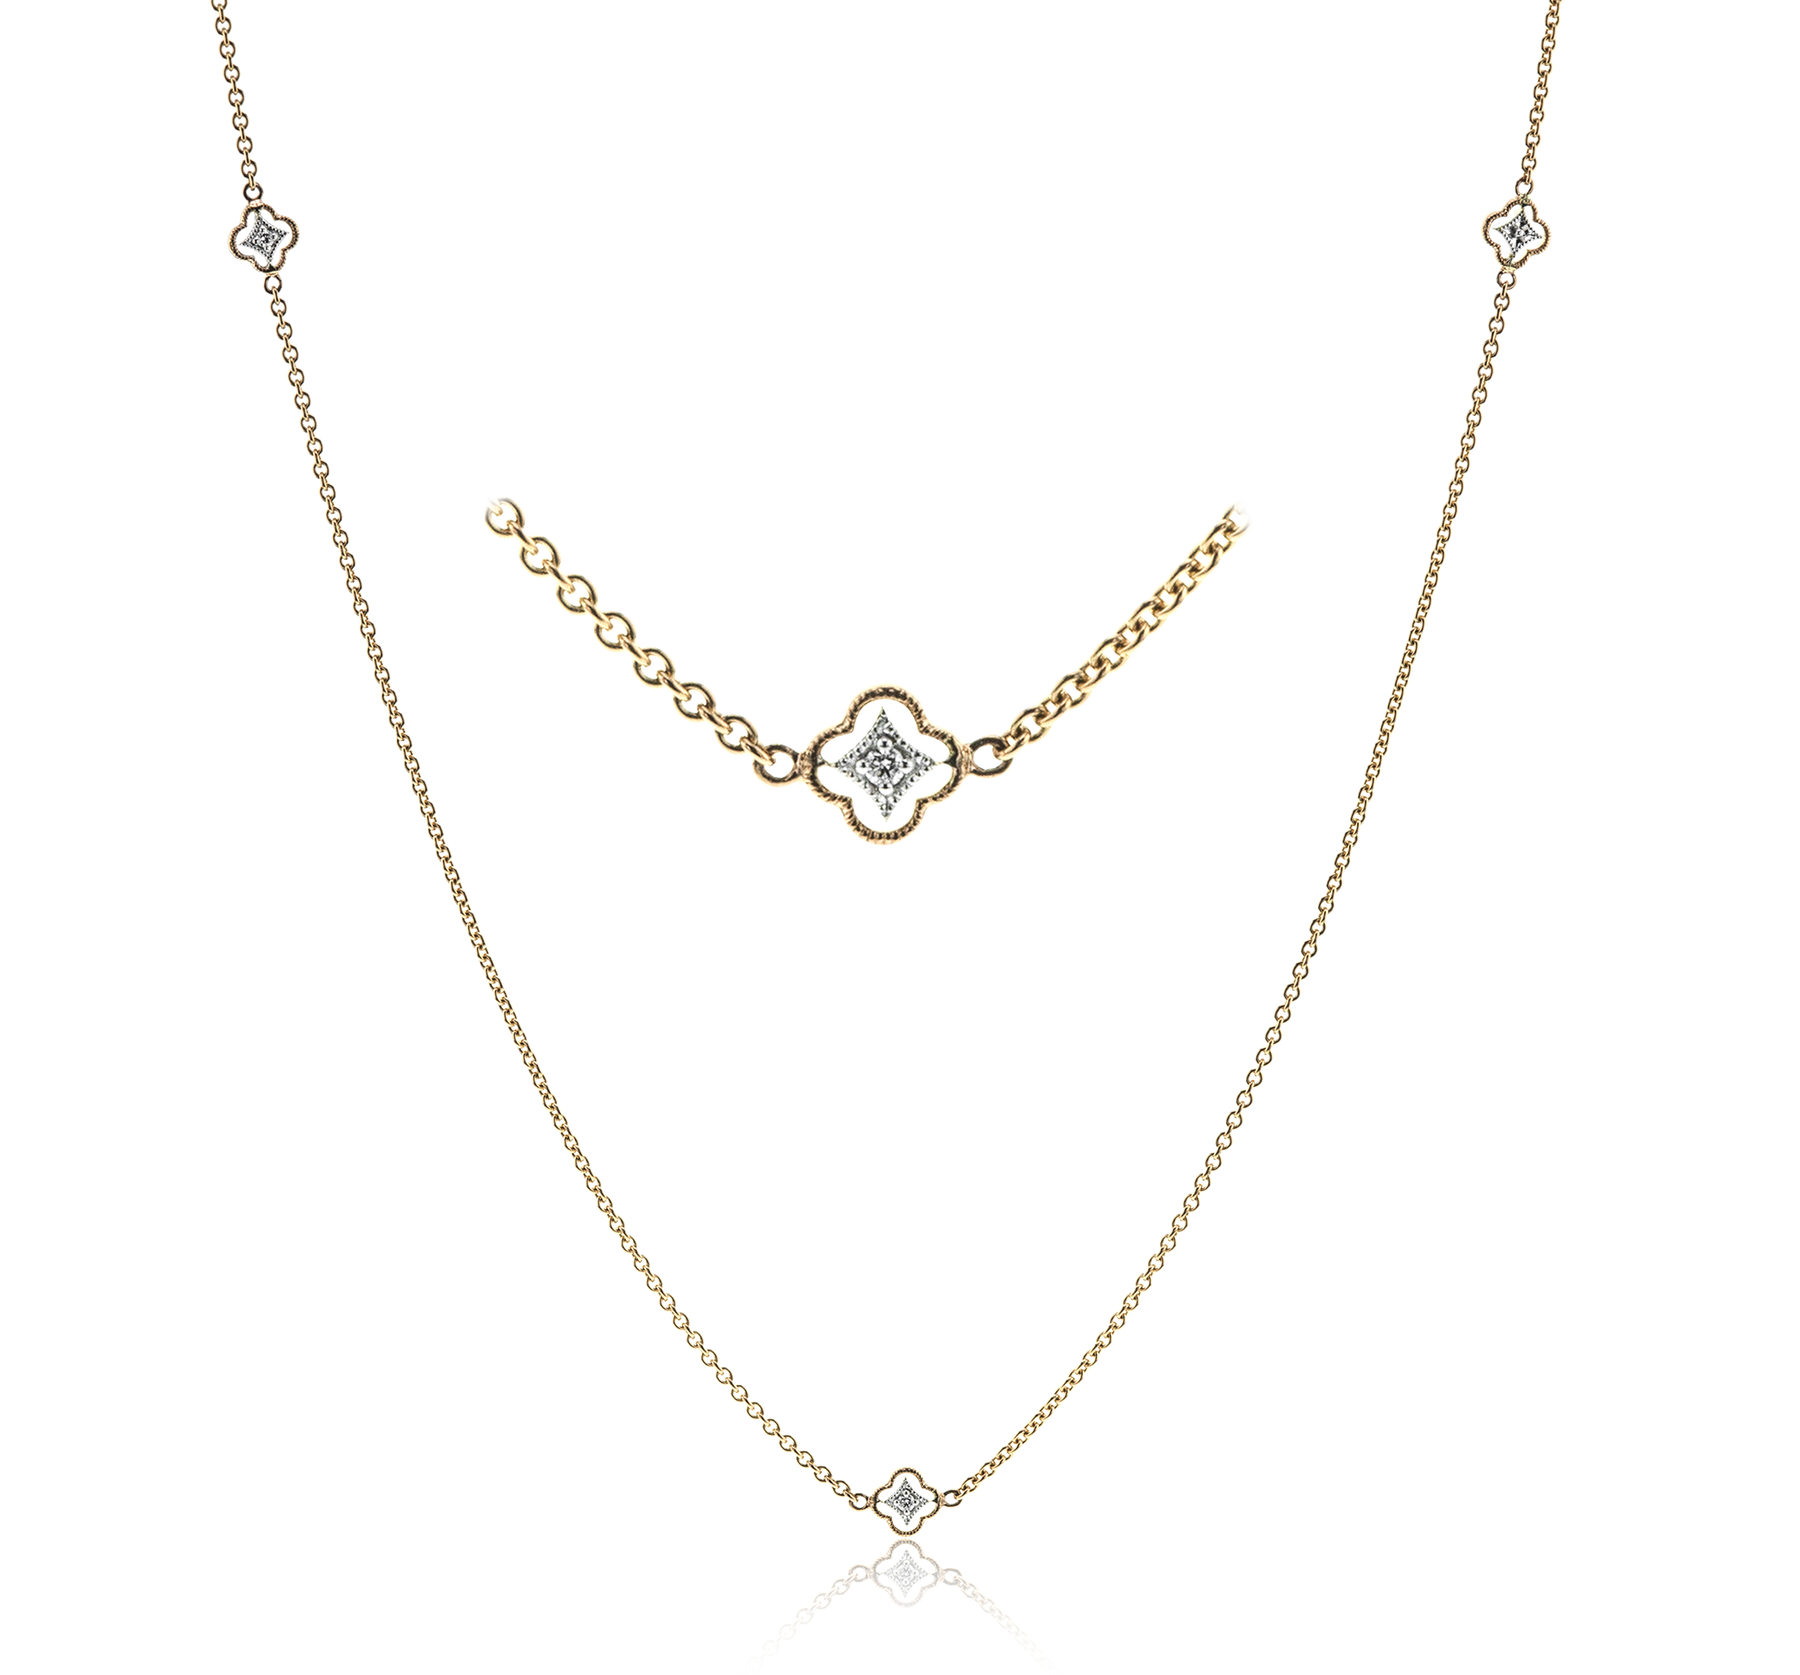 Trellis Necklace in 18k Gold with Diamonds CH114